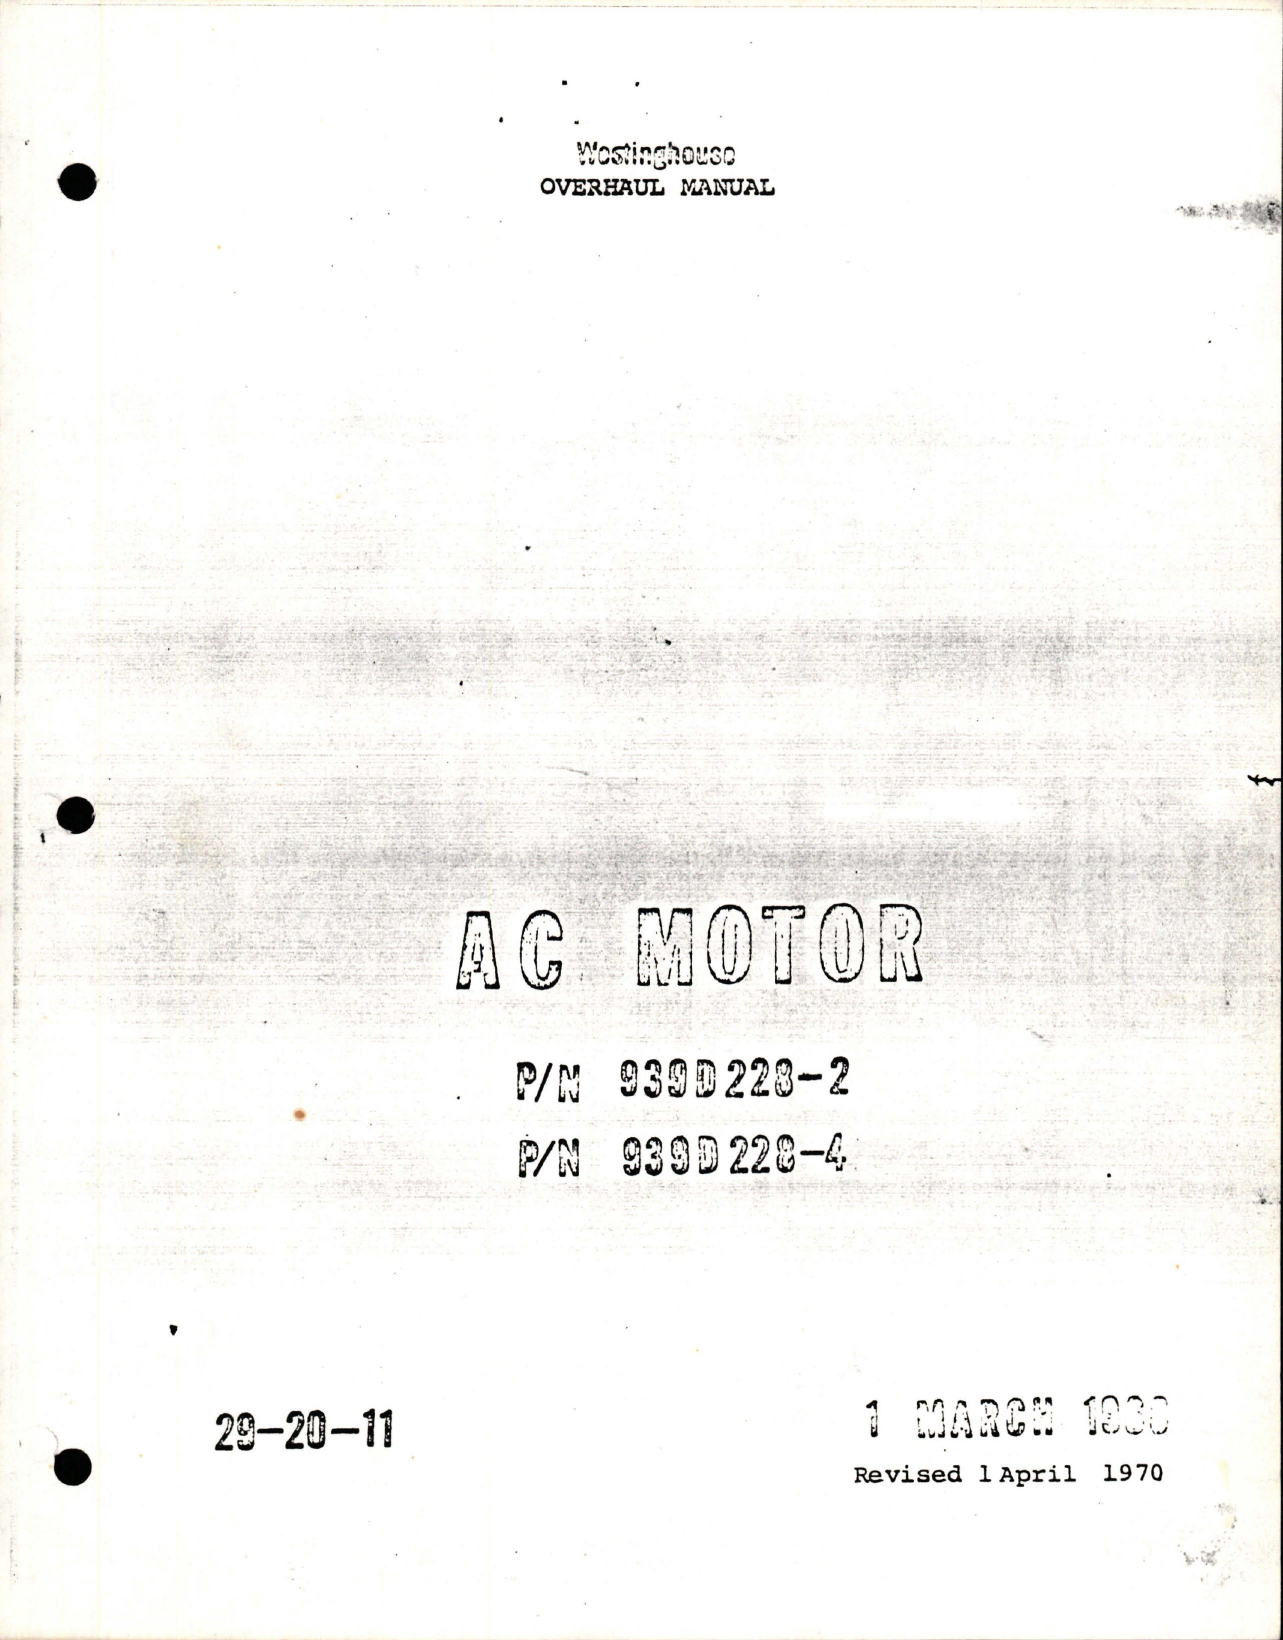 Sample page 1 from AirCorps Library document: Overhaul Manual for AC Motor - Parts 939D228-2 and 939D228-4